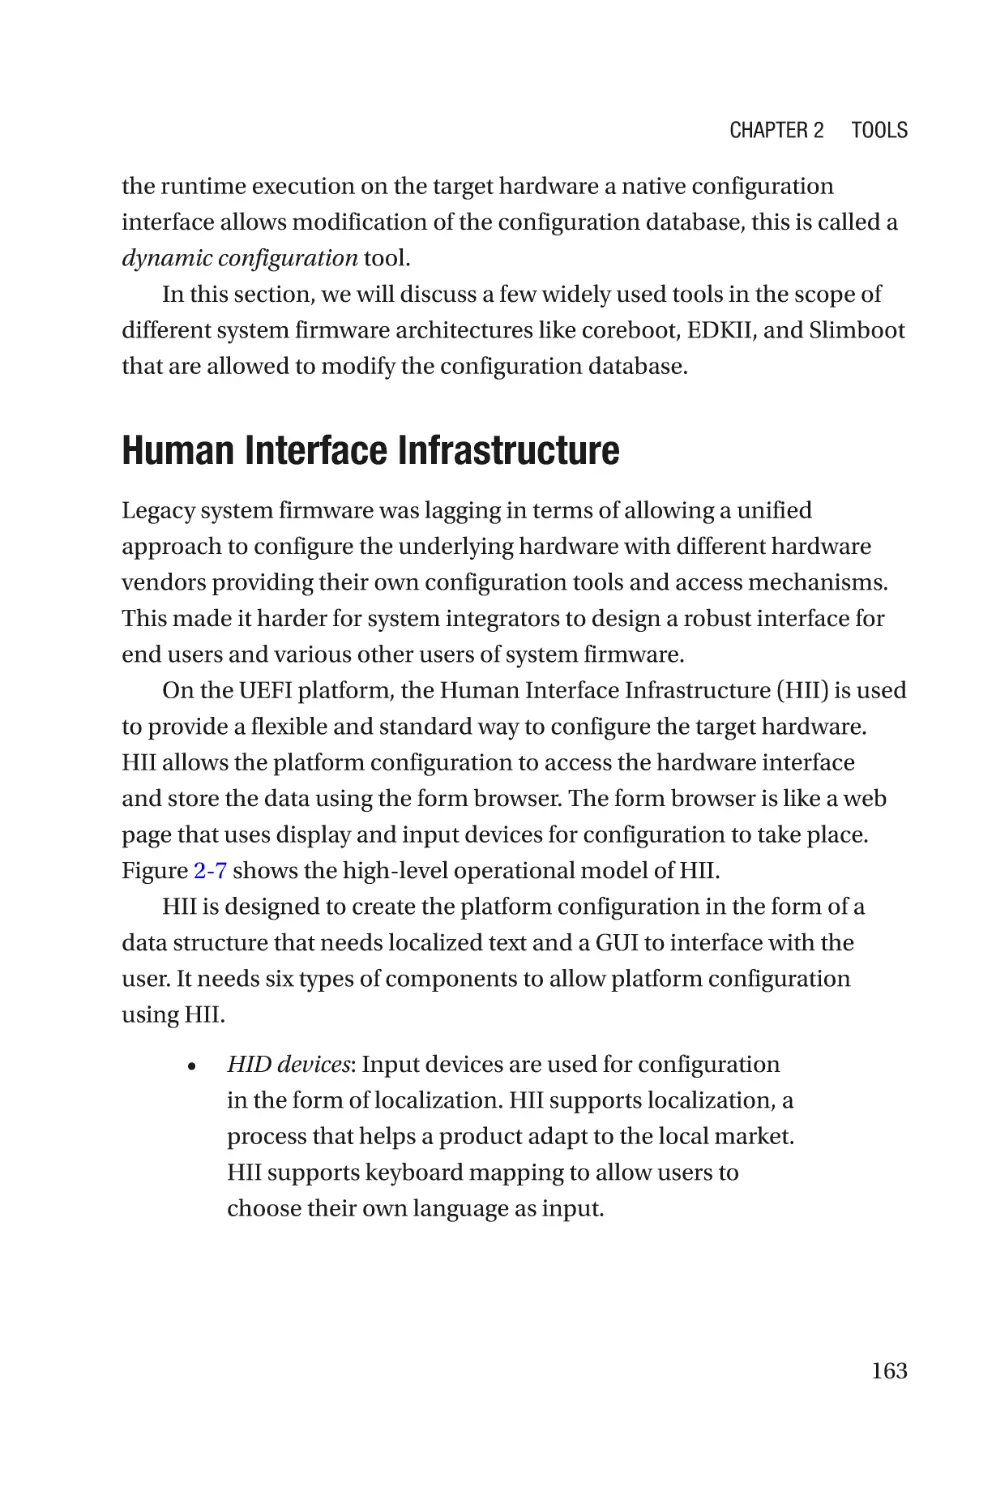 Human Interface Infrastructure